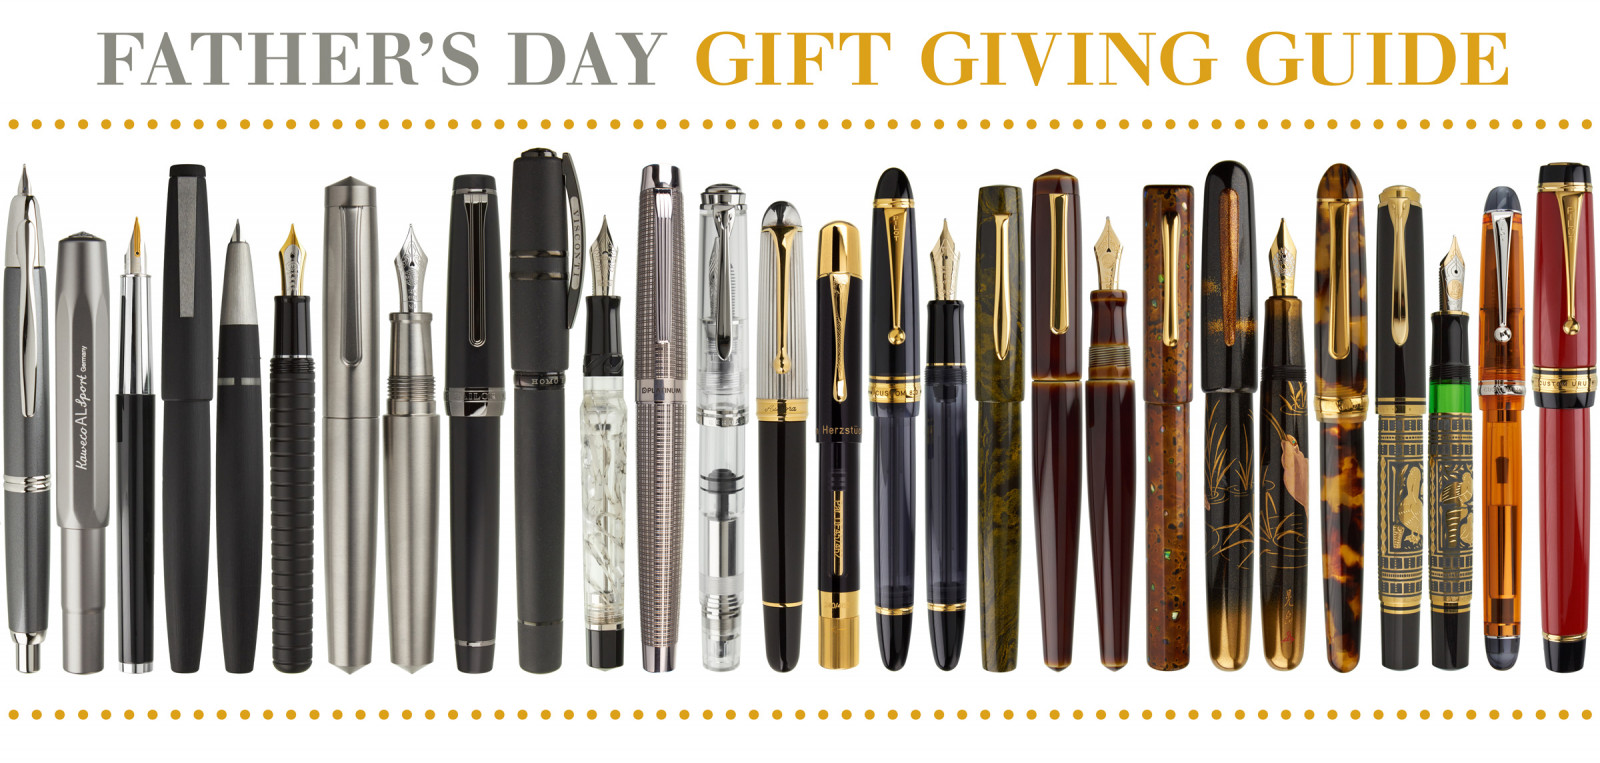 Father's Day Gift Giving Buying Guide from Nibs.com